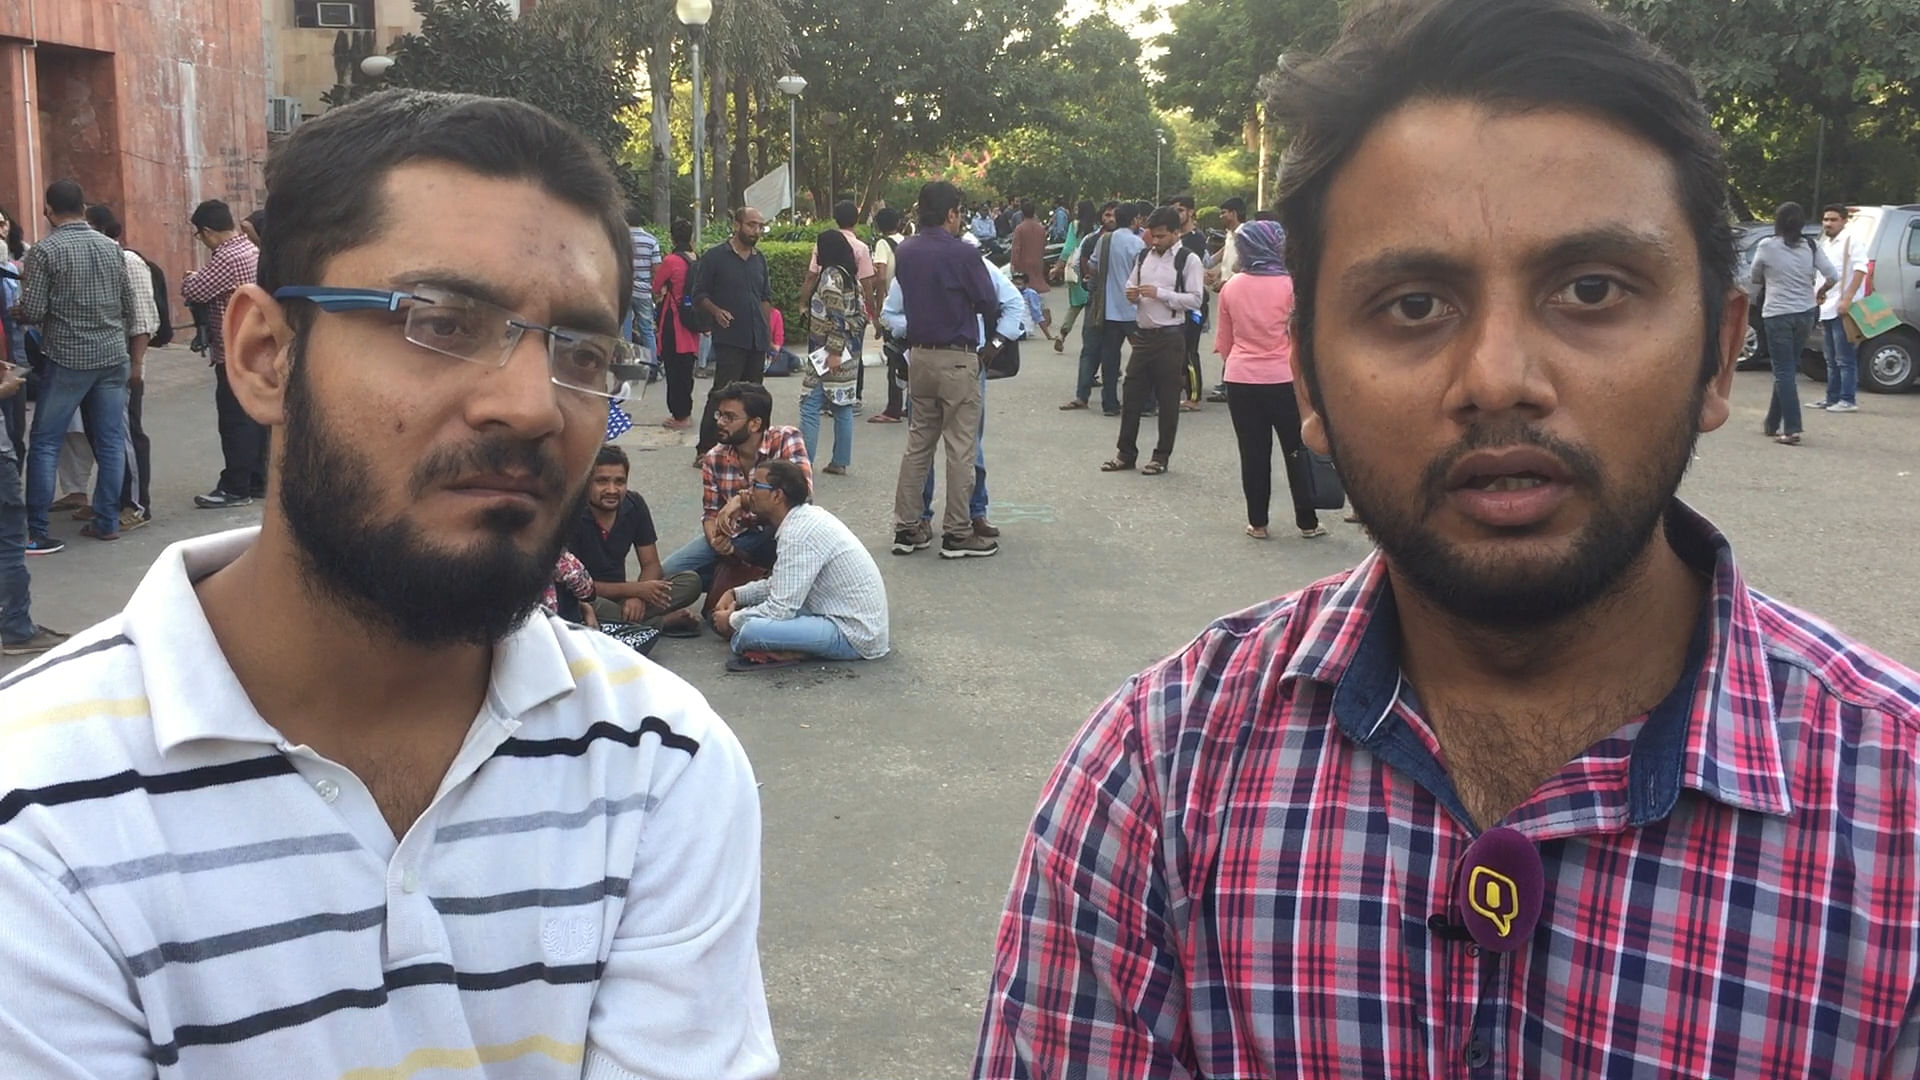 Mujeeb Ahmed (left) and Aqdas Musharraf, Najeeb Ahmed’s brother and cousin. Najeeb is the JNU student who has been missing for almost a week. (Photo: <b>The Quint</b>)